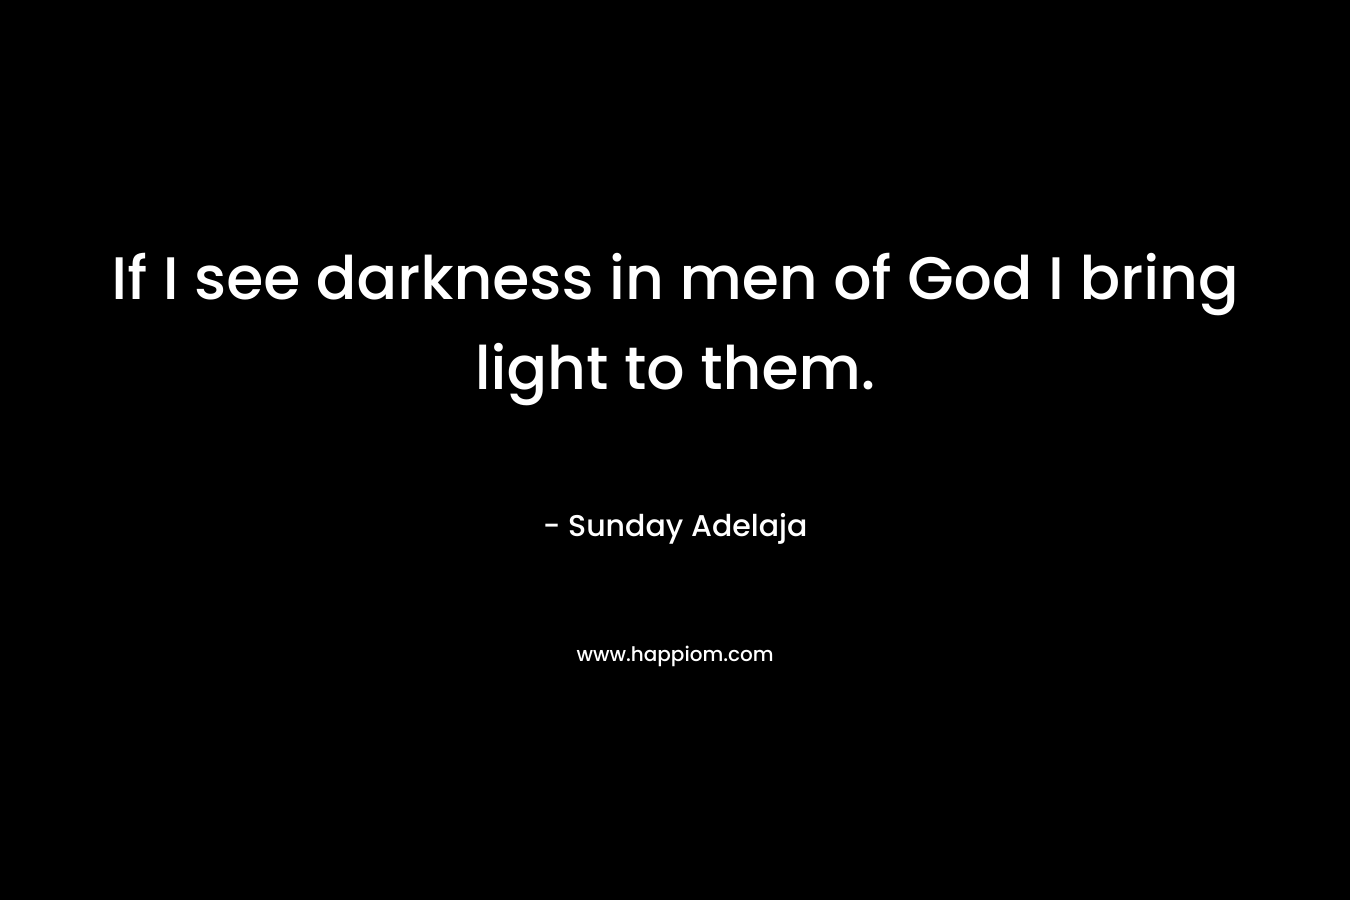 If I see darkness in men of God I bring light to them.